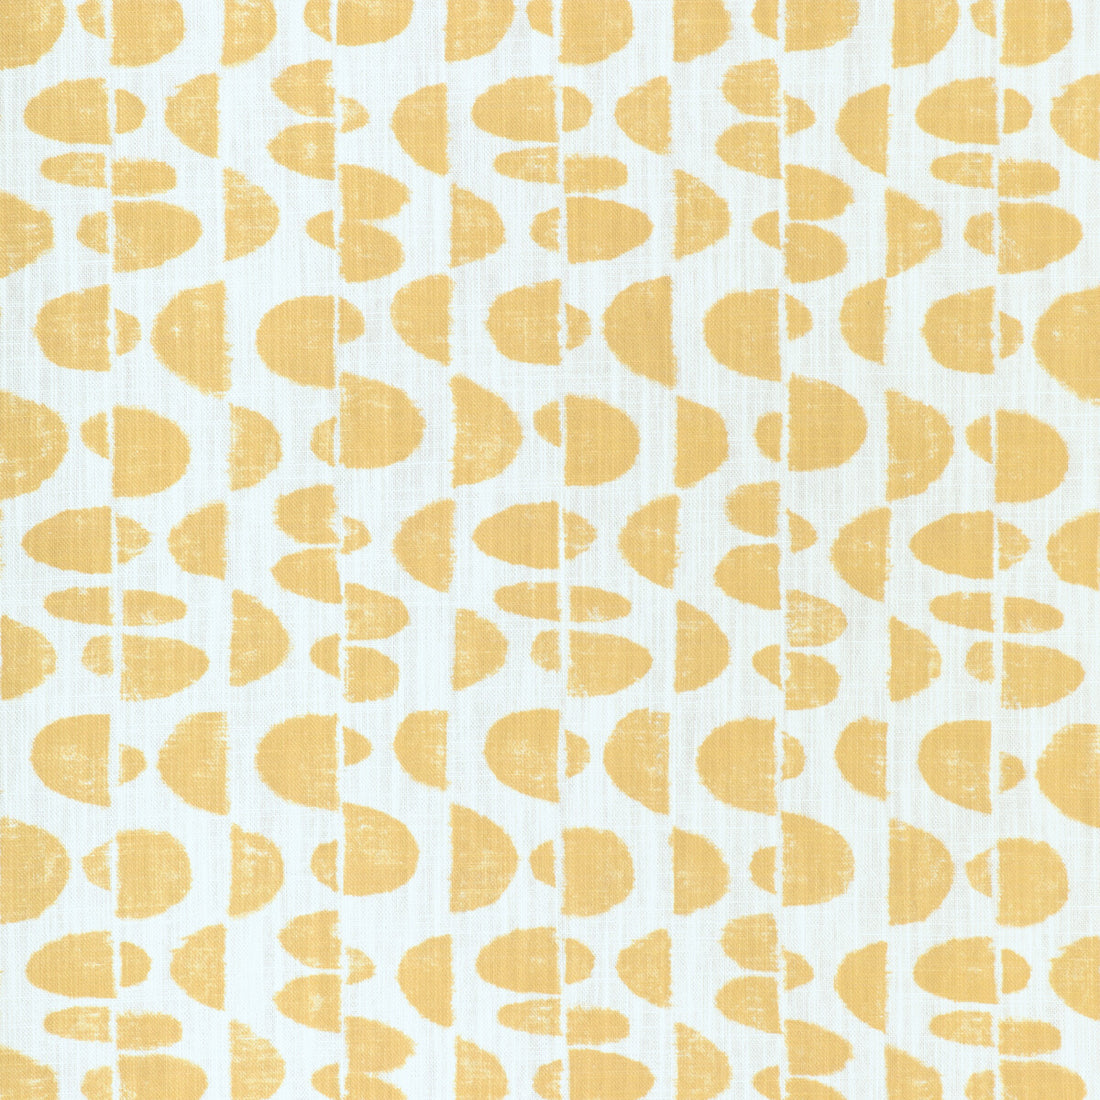 Moon Phase fabric in citrus color - pattern MOON PHASE.40.0 - by Kravet Basics in the Small Scale Prints collection